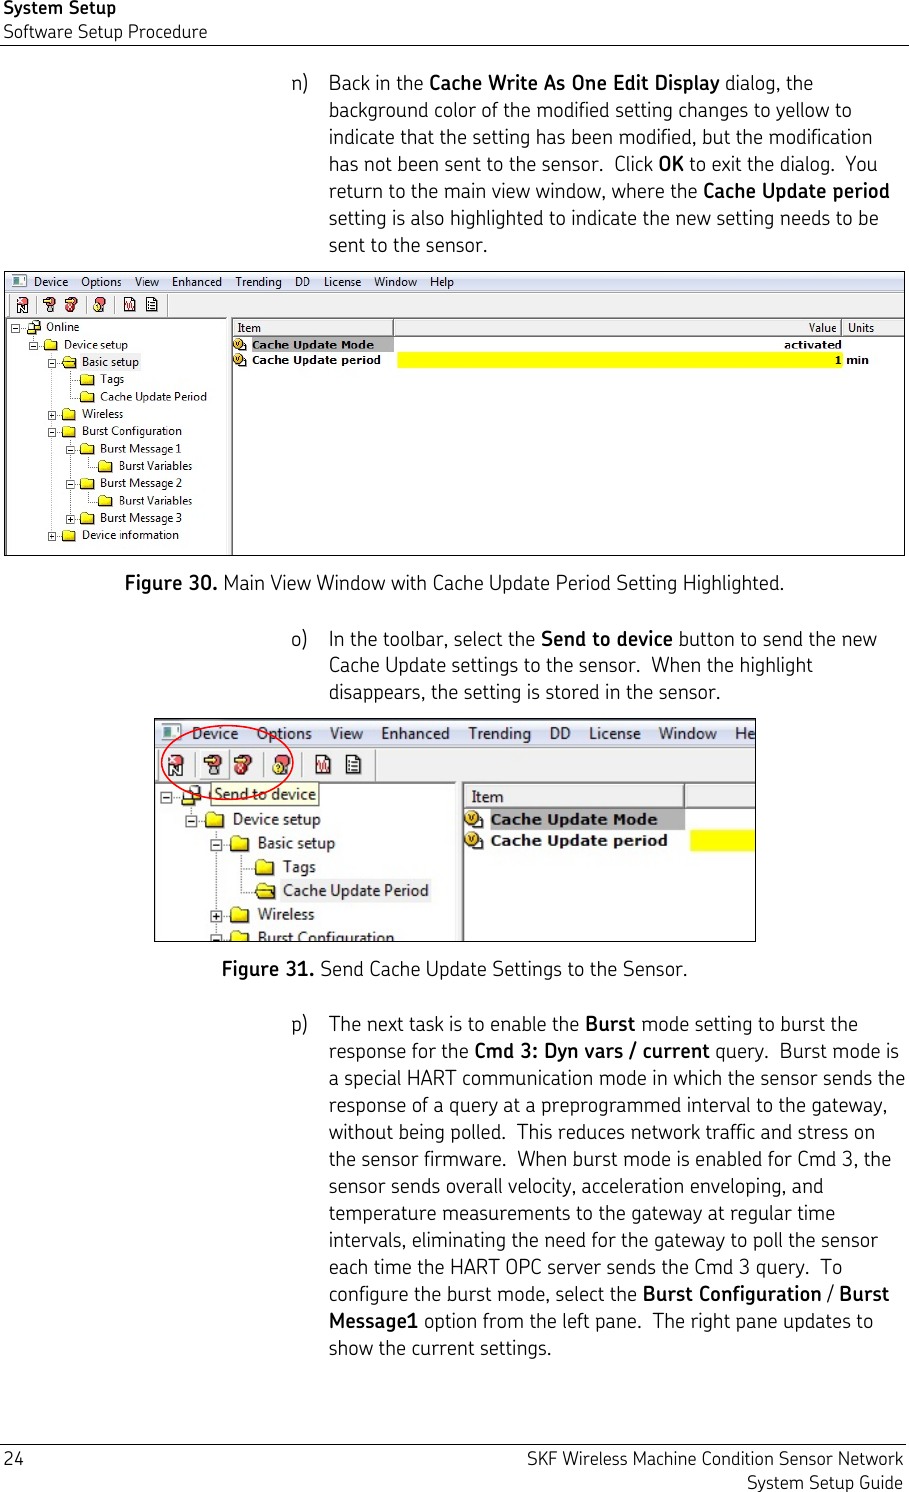 System Setup Software Setup Procedure 24  SKF Wireless Machine Condition Sensor Network System Setup Guide n) Back in the Cache Write As One Edit Display dialog, the background color of the modified setting changes to yellow to indicate that the setting has been modified, but the modification has not been sent to the sensor.  Click OK to exit the dialog.  You return to the main view window, where the Cache Update period setting is also highlighted to indicate the new setting needs to be sent to the sensor.  Figure 30. Main View Window with Cache Update Period Setting Highlighted. o) In the toolbar, select the Send to device button to send the new Cache Update settings to the sensor.  When the highlight disappears, the setting is stored in the sensor.  Figure 31. Send Cache Update Settings to the Sensor. p) The next task is to enable the Burst mode setting to burst the response for the Cmd 3: Dyn vars / current query.  Burst mode is a special HART communication mode in which the sensor sends the response of a query at a preprogrammed interval to the gateway, without being polled.  This reduces network traffic and stress on the sensor firmware.  When burst mode is enabled for Cmd 3, the sensor sends overall velocity, acceleration enveloping, and temperature measurements to the gateway at regular time intervals, eliminating the need for the gateway to poll the sensor each time the HART OPC server sends the Cmd 3 query.  To configure the burst mode, select the Burst Configuration / Burst Message1 option from the left pane.  The right pane updates to show the current settings. 